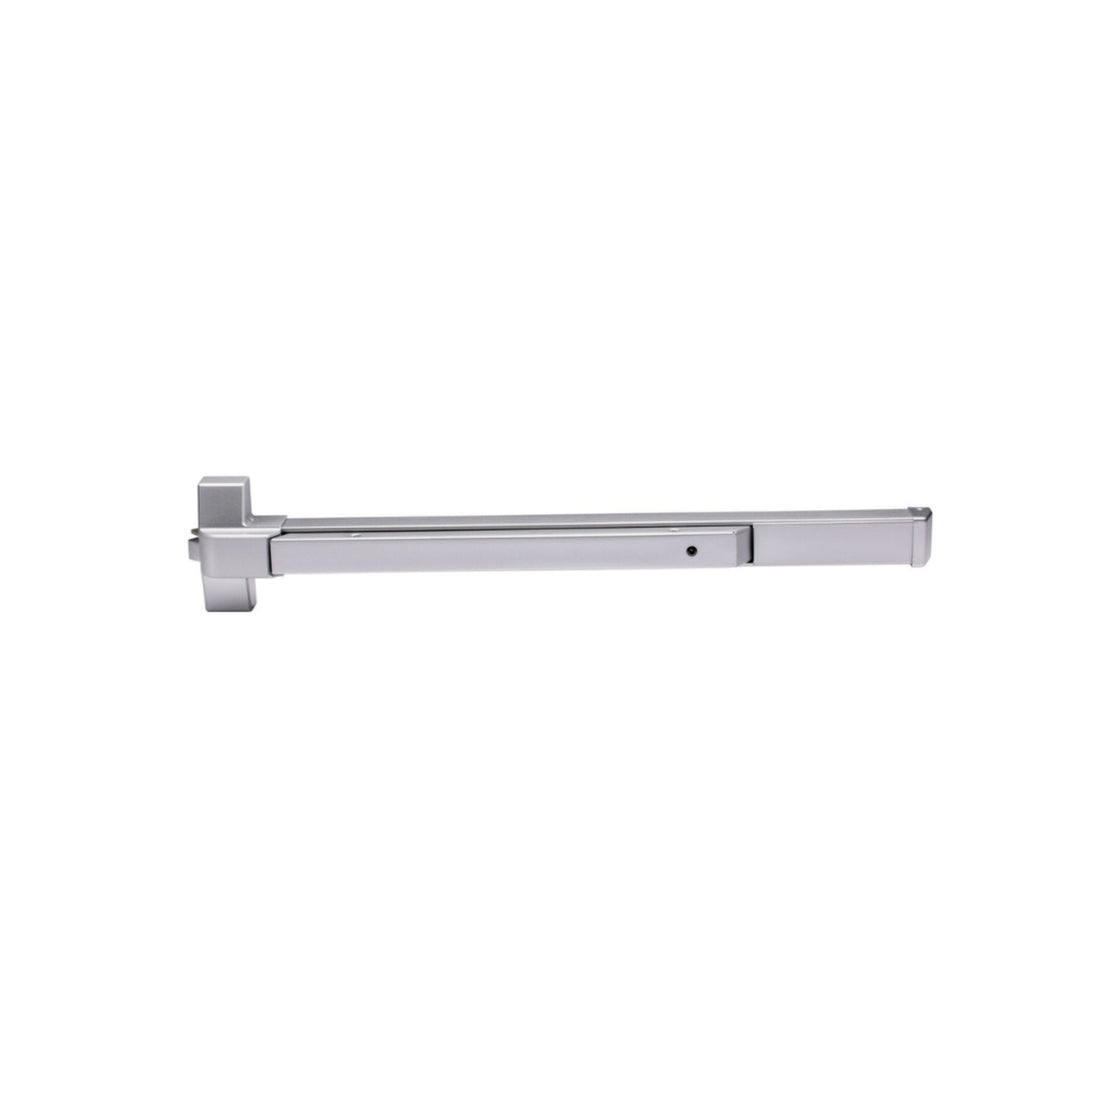 EDSV Series Grade 2 Commercial 36 in Fire Rated Surface Vertical Rod Touch Bar Exit Device -  Pro-Edge HD